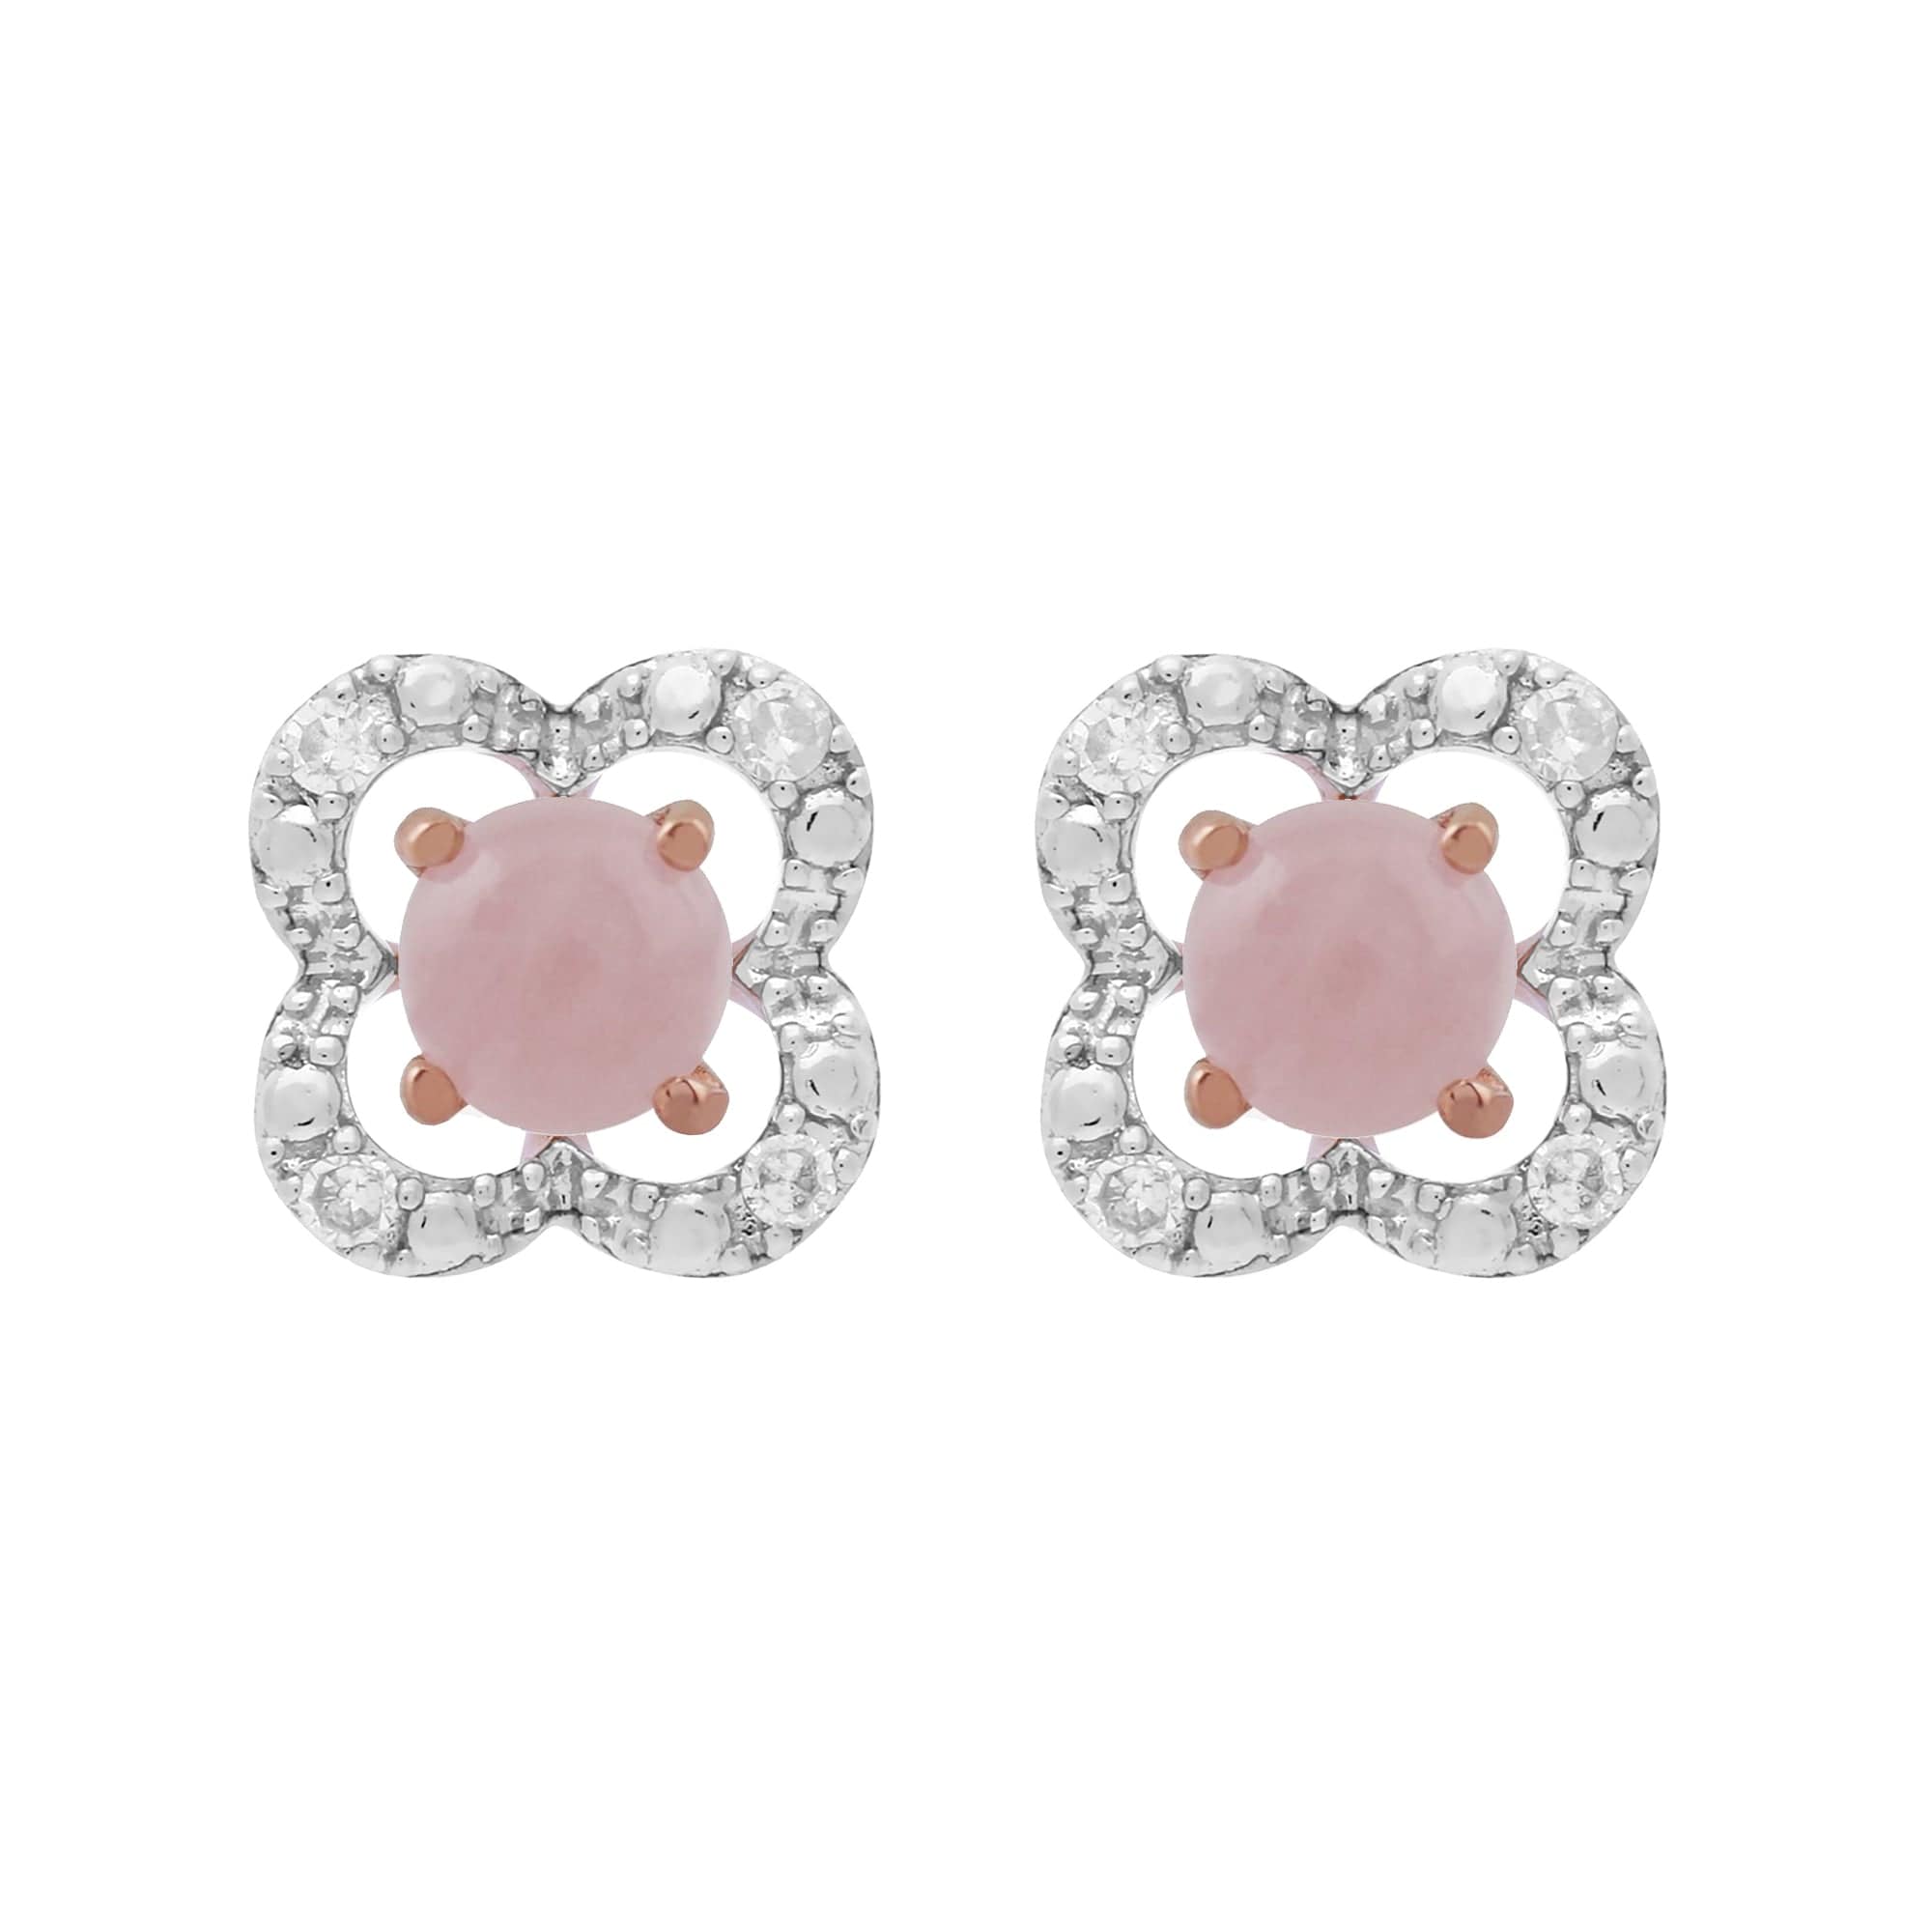 183E4316049-191E0373019 Classic Round Rose Quartz Stud Earrings with Detachable Diamond Flower Jacket in 9ct Rose Gold 1